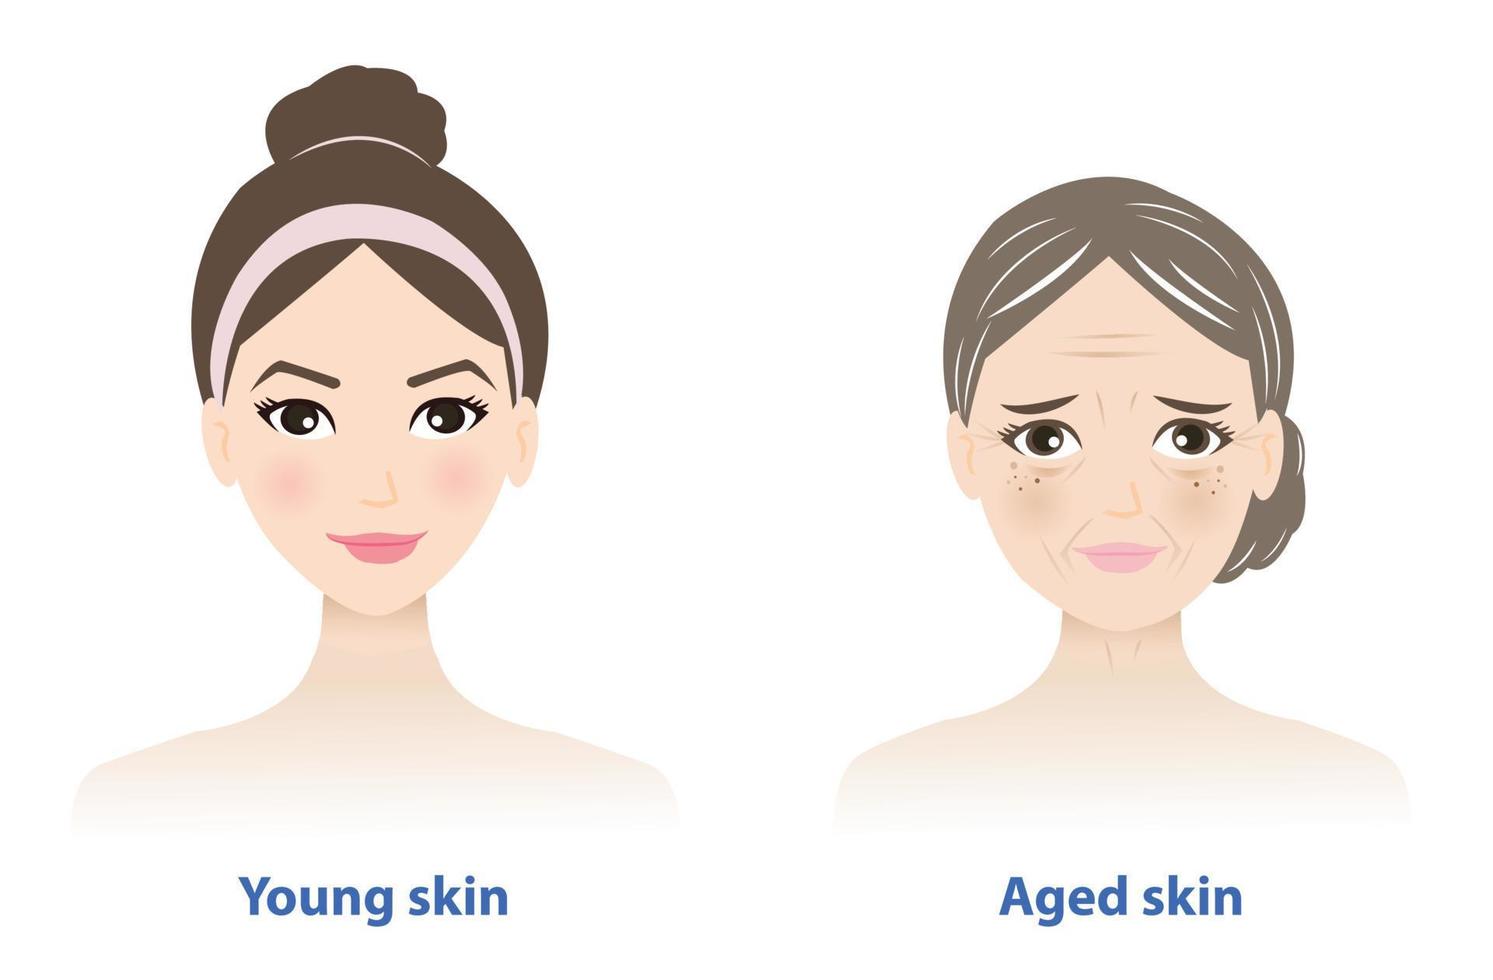 Differences between young and aged skin. Youthful healthy skin looks smooth, tight, strong and normal collagen content. Aged skin contains several signs of degeneration. Skin care and beauty concept. vector